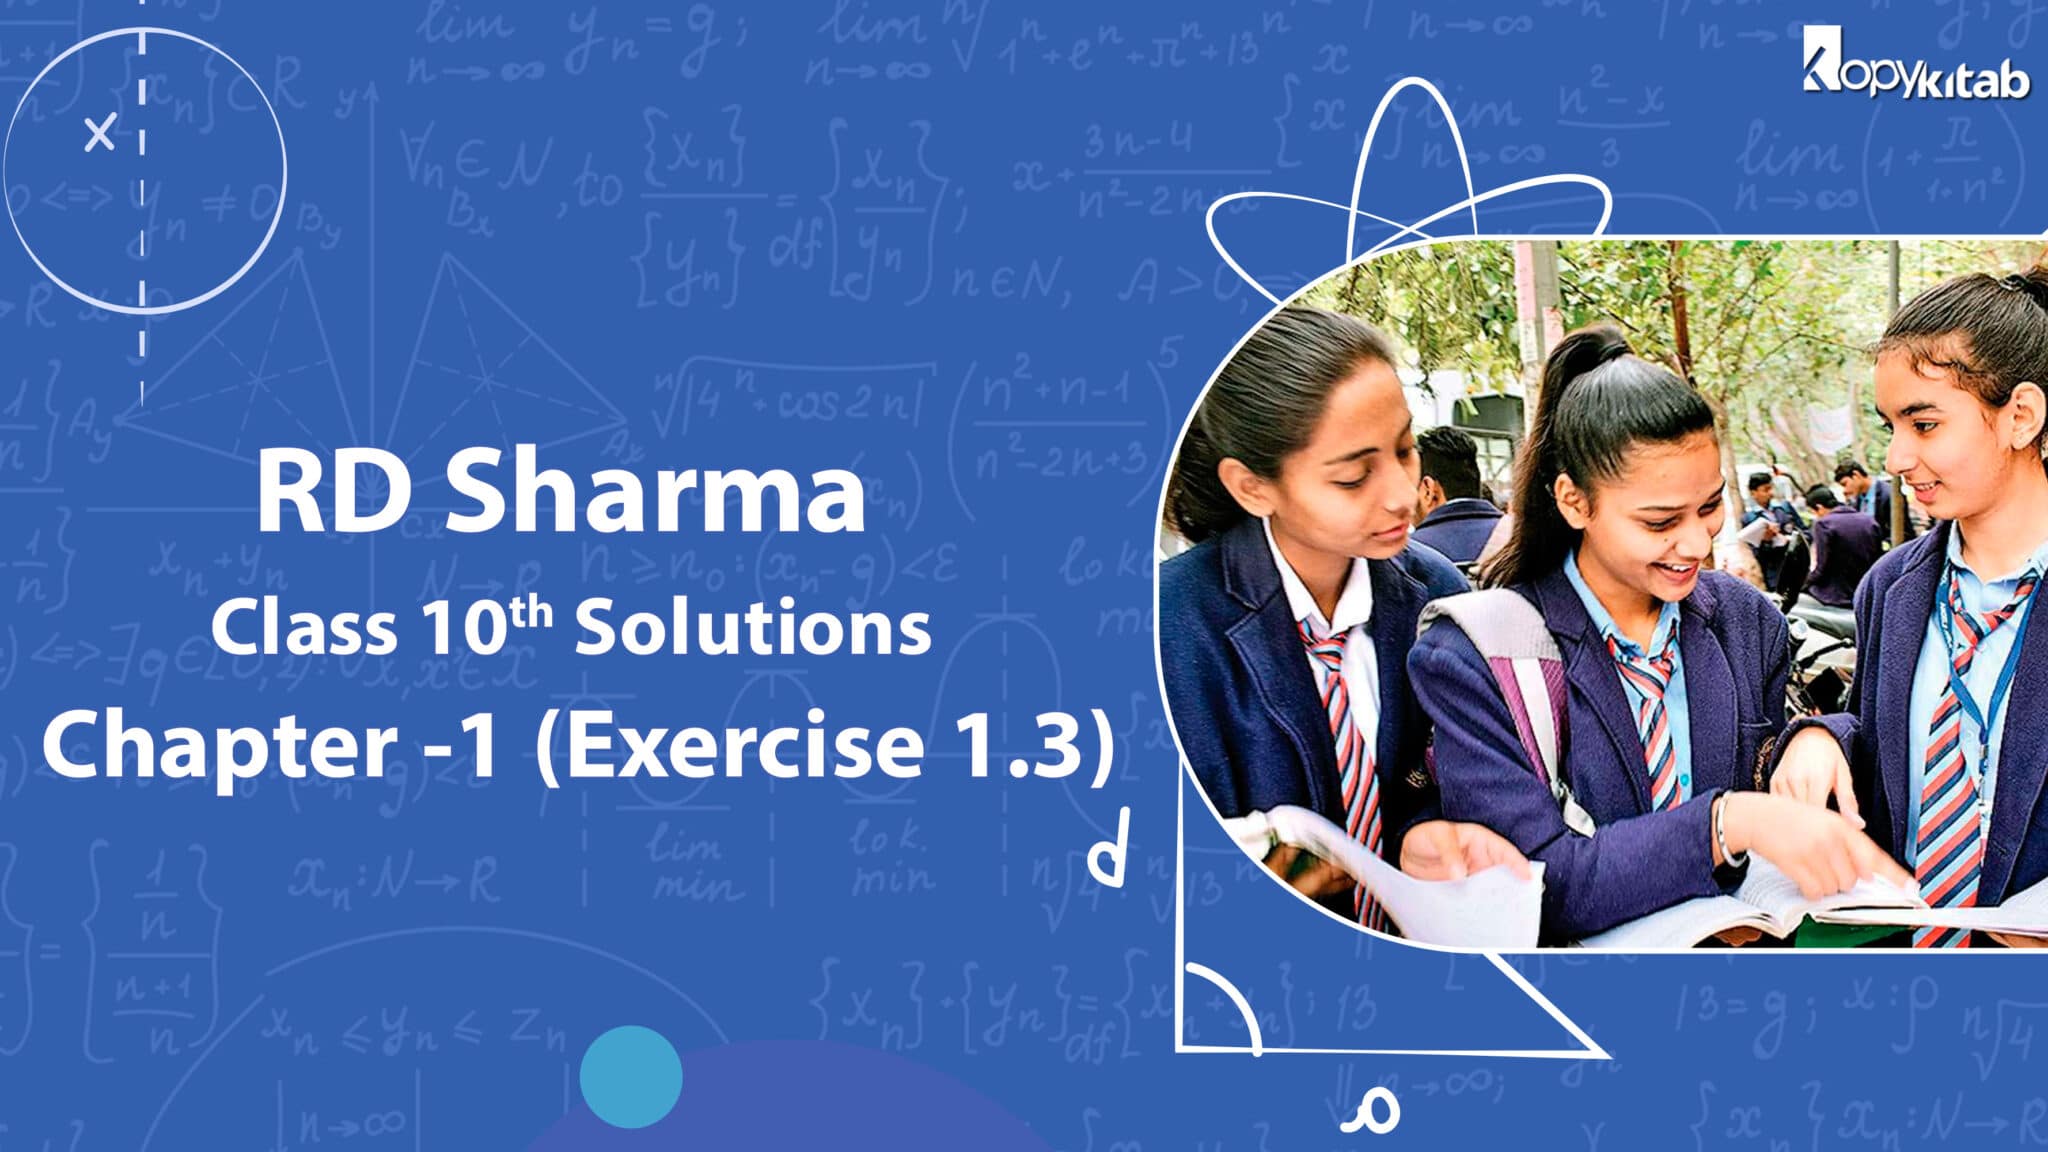 RD Sharma Class 10 Solutions Chapter 1 Exercise 1.3